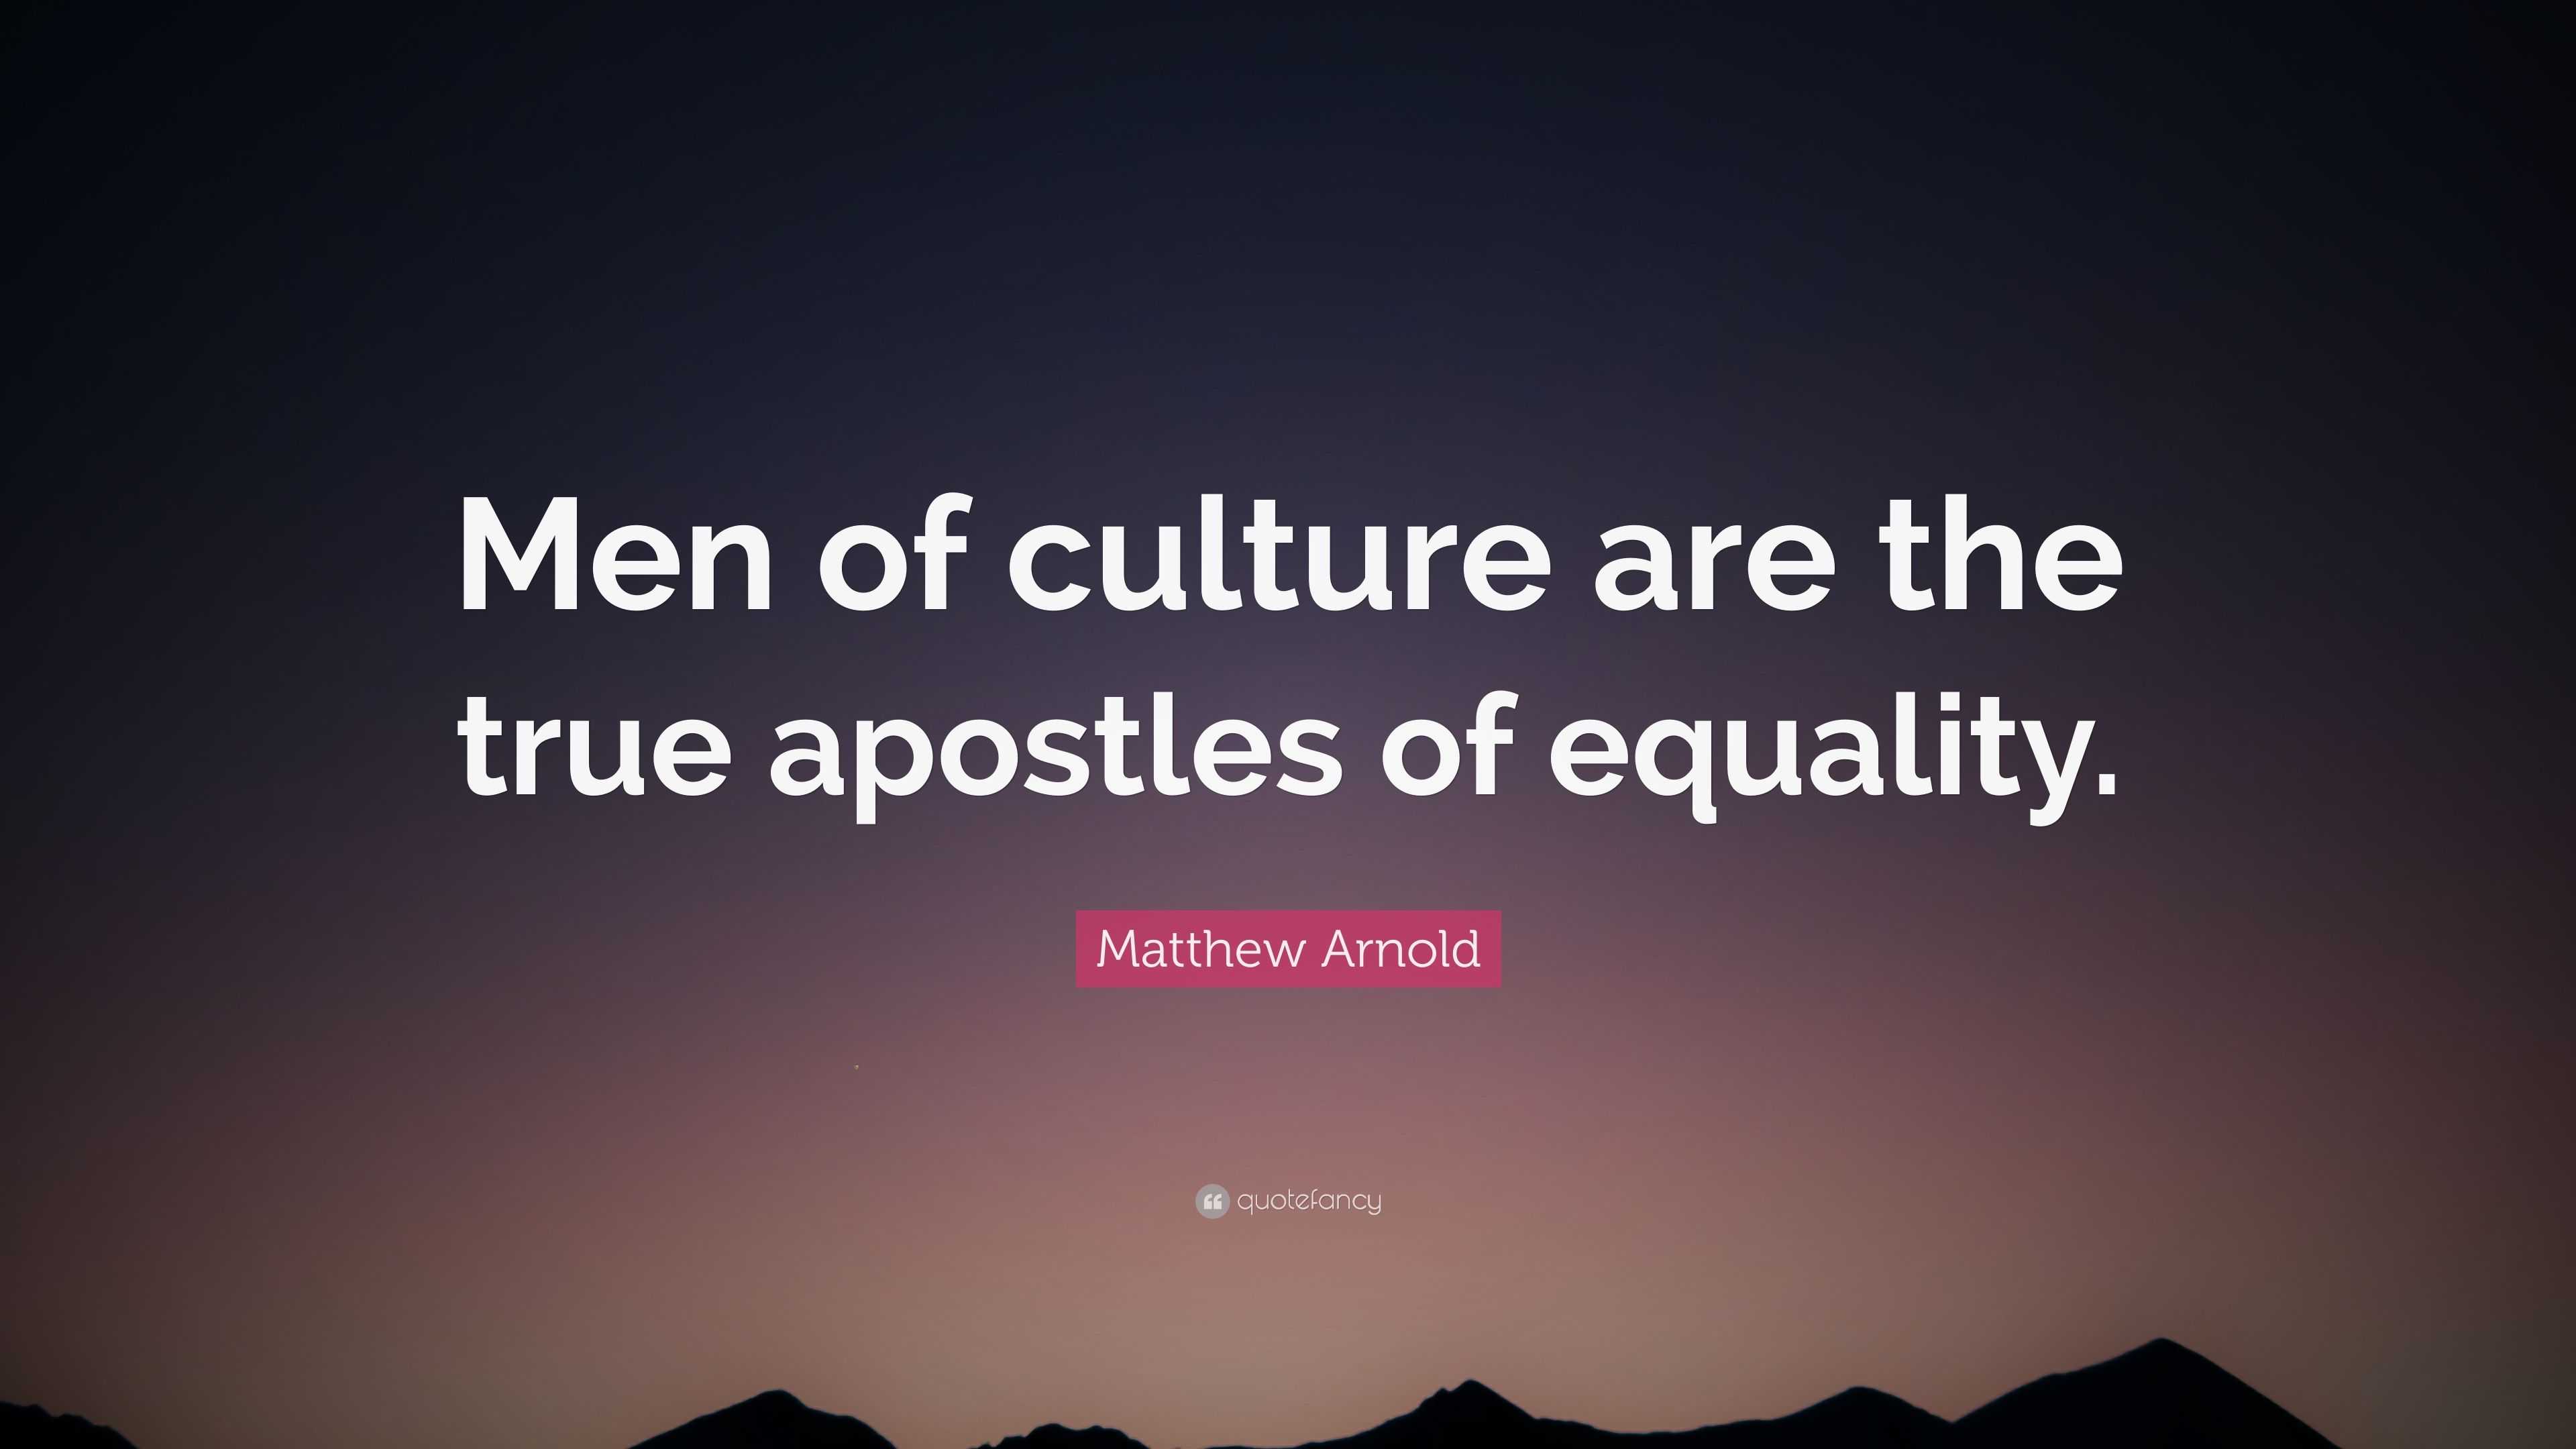 matthew arnold view on culture